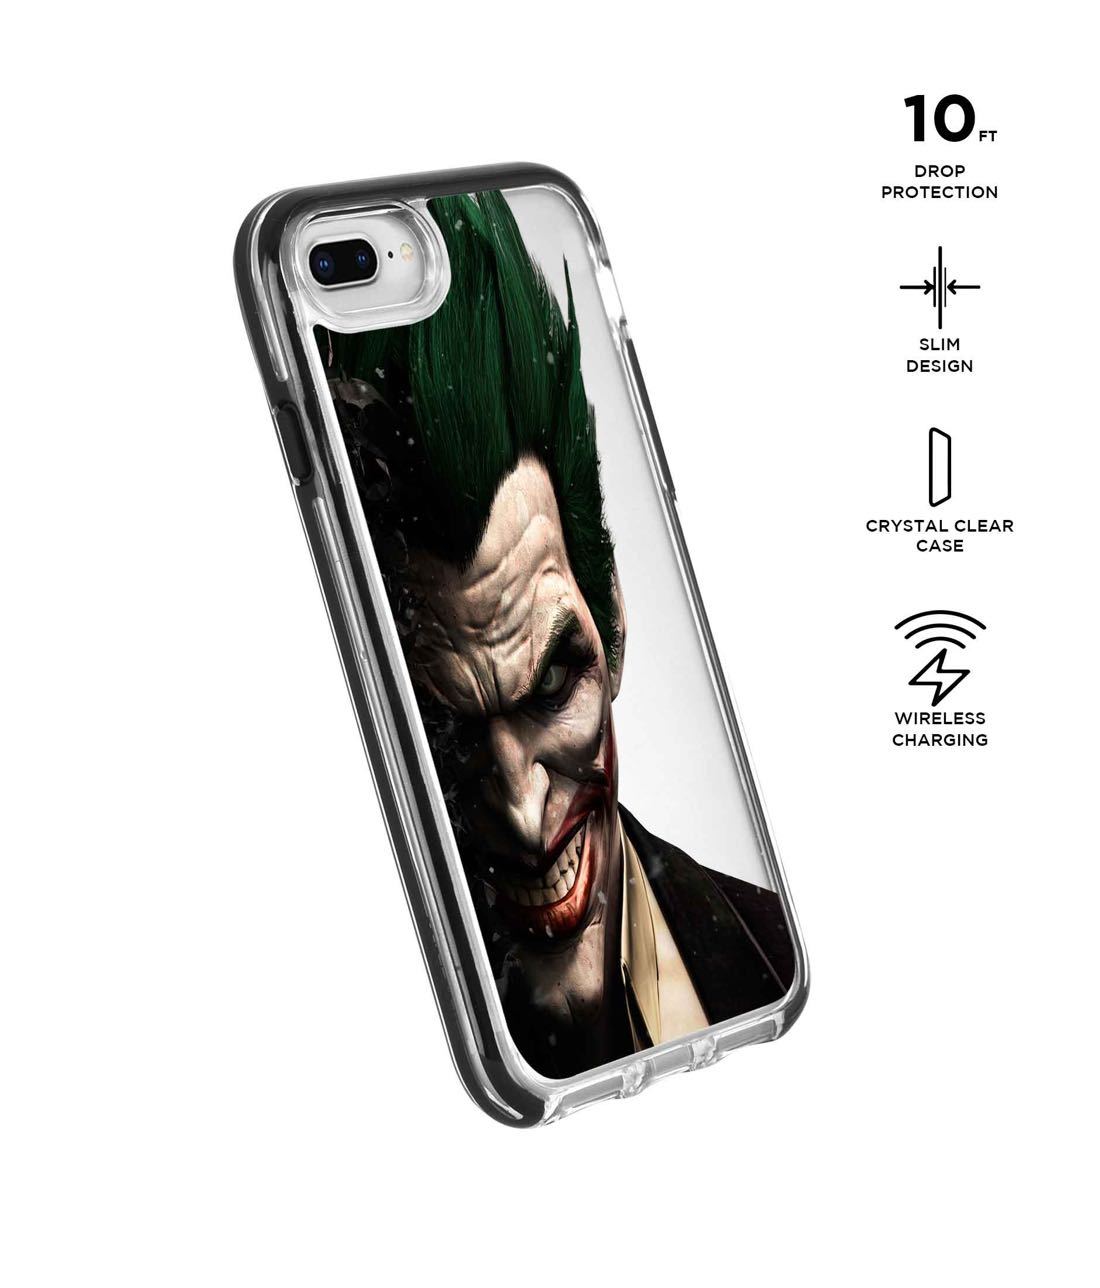 Joker Withers - Extreme Phone Case for iPhone 8 Plus